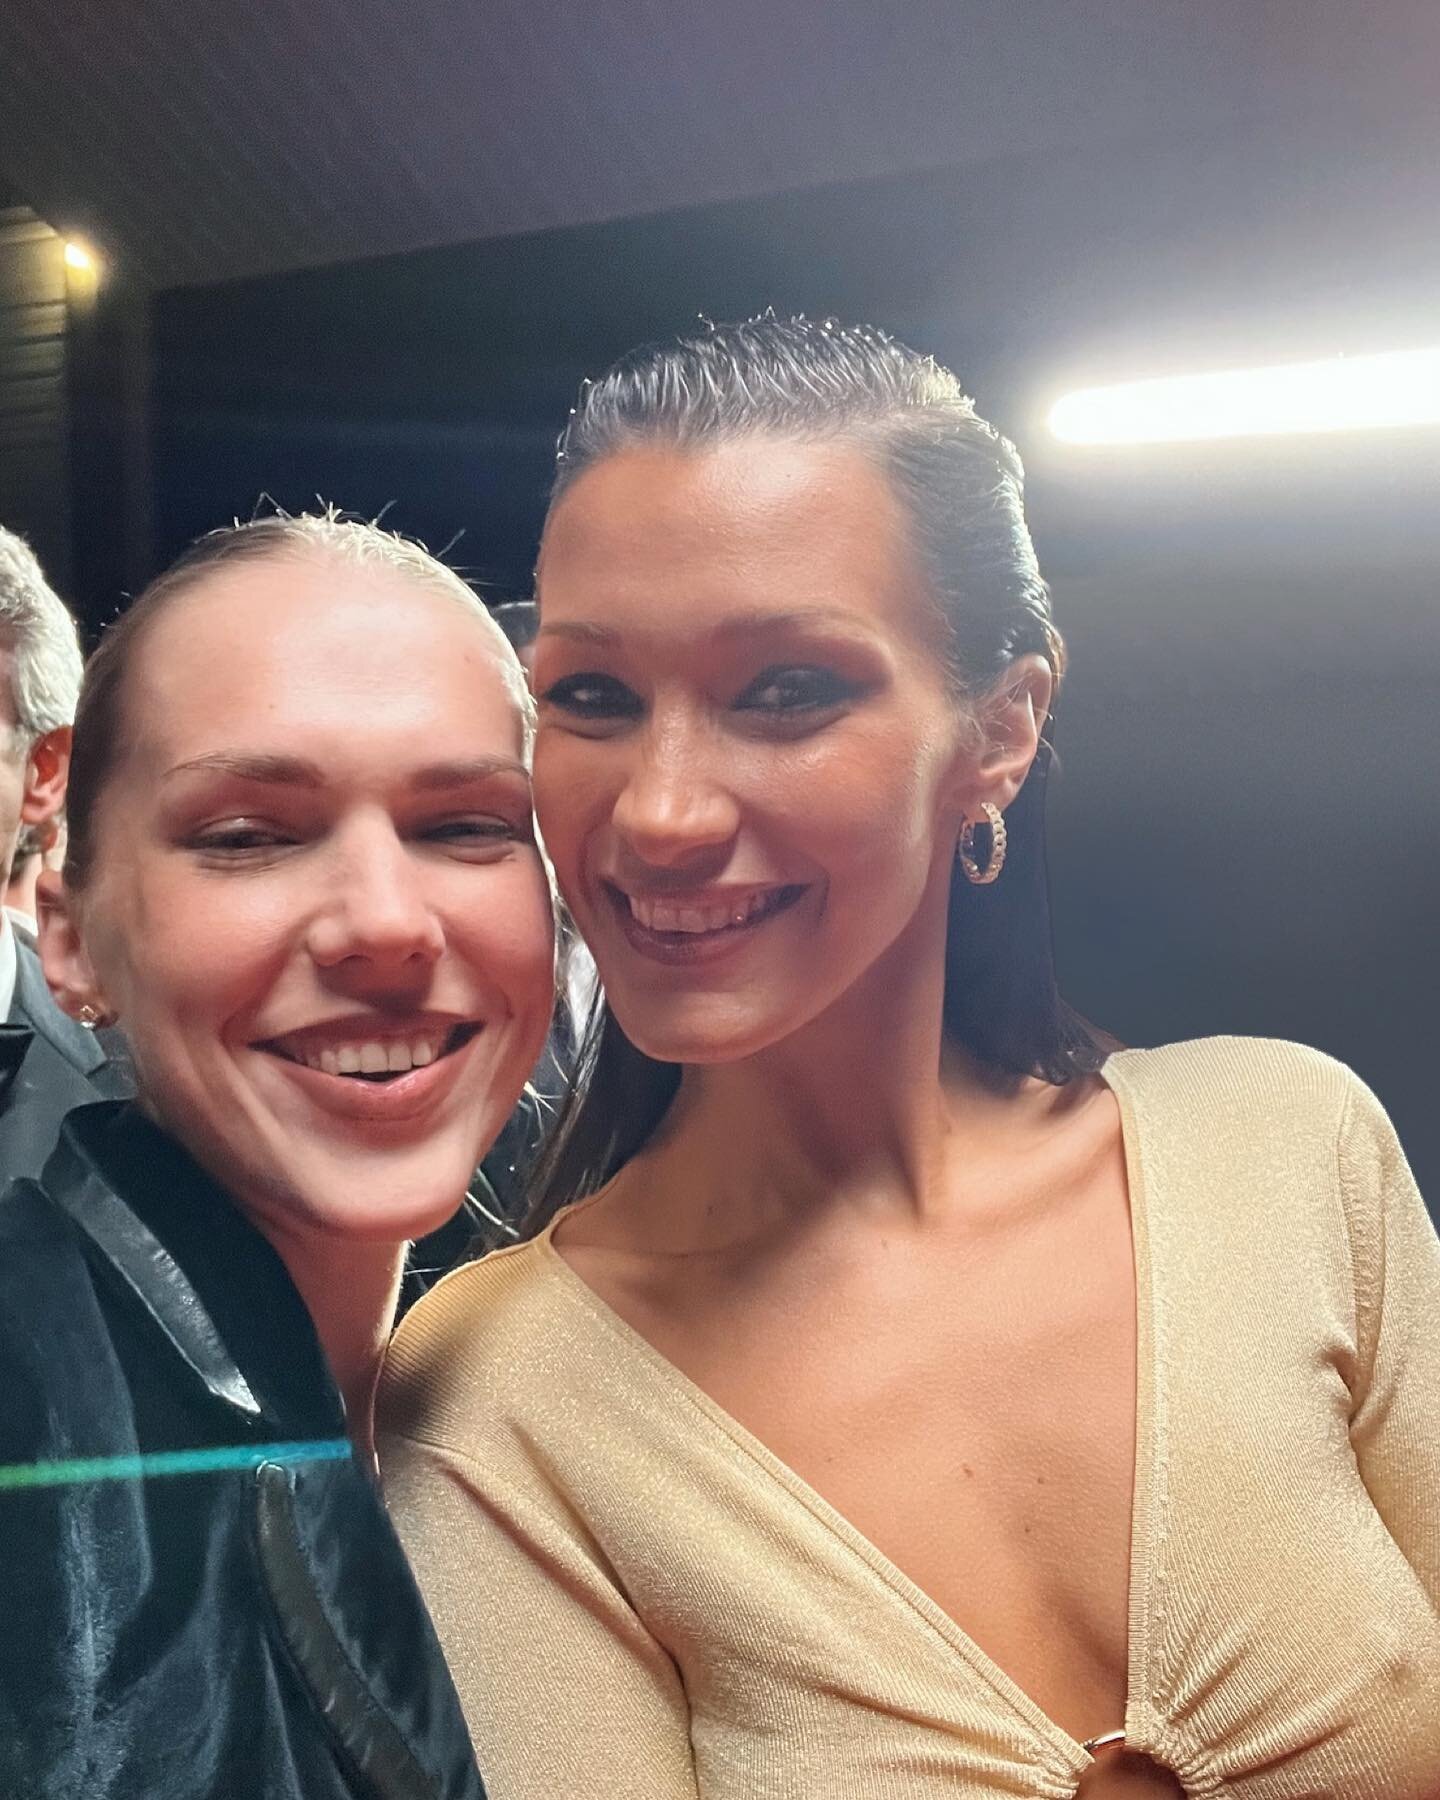 @michaelkors Spring 2023. As much as this is a moment of fandom it&rsquo;s an appreciation towards getting to work with the absolute elite of the modeling world @bellahadid @heconghc @altonmason Thank you my friend @roycevarnerr for capturing me gett